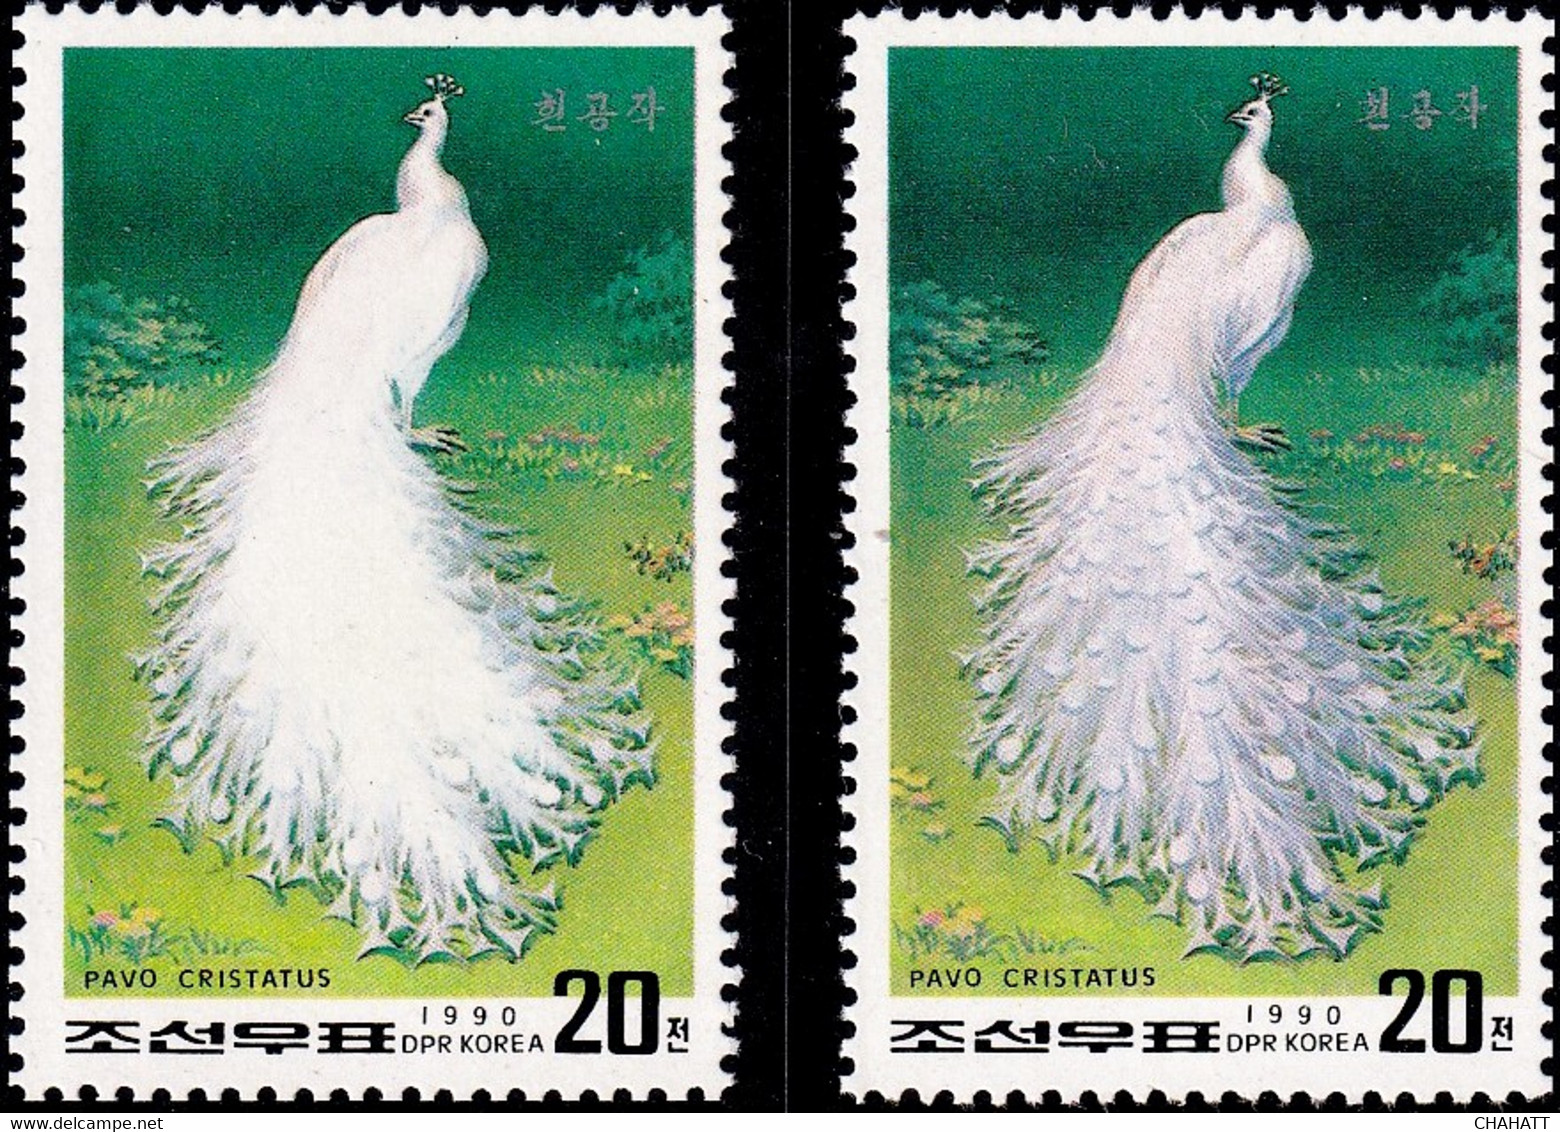 WHITE PEACOCK- PHEASANTS-ERROR WITH NORMAL -EYELETS MISSING- KOREA- 1990-EXTREMELY SCARCE- MNH-BR4-16 - Paons